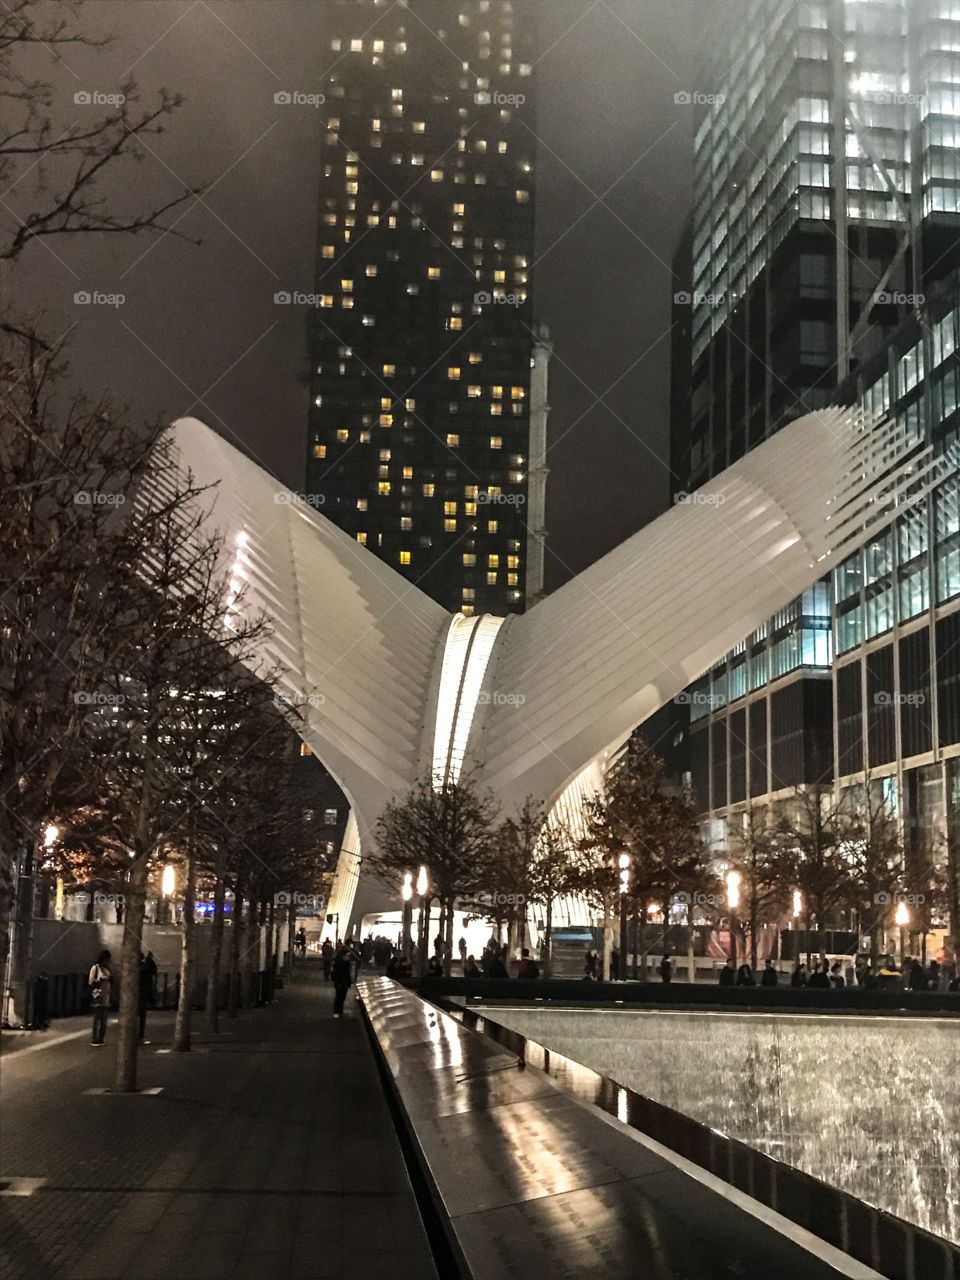 The world trade centre, oculus, train station